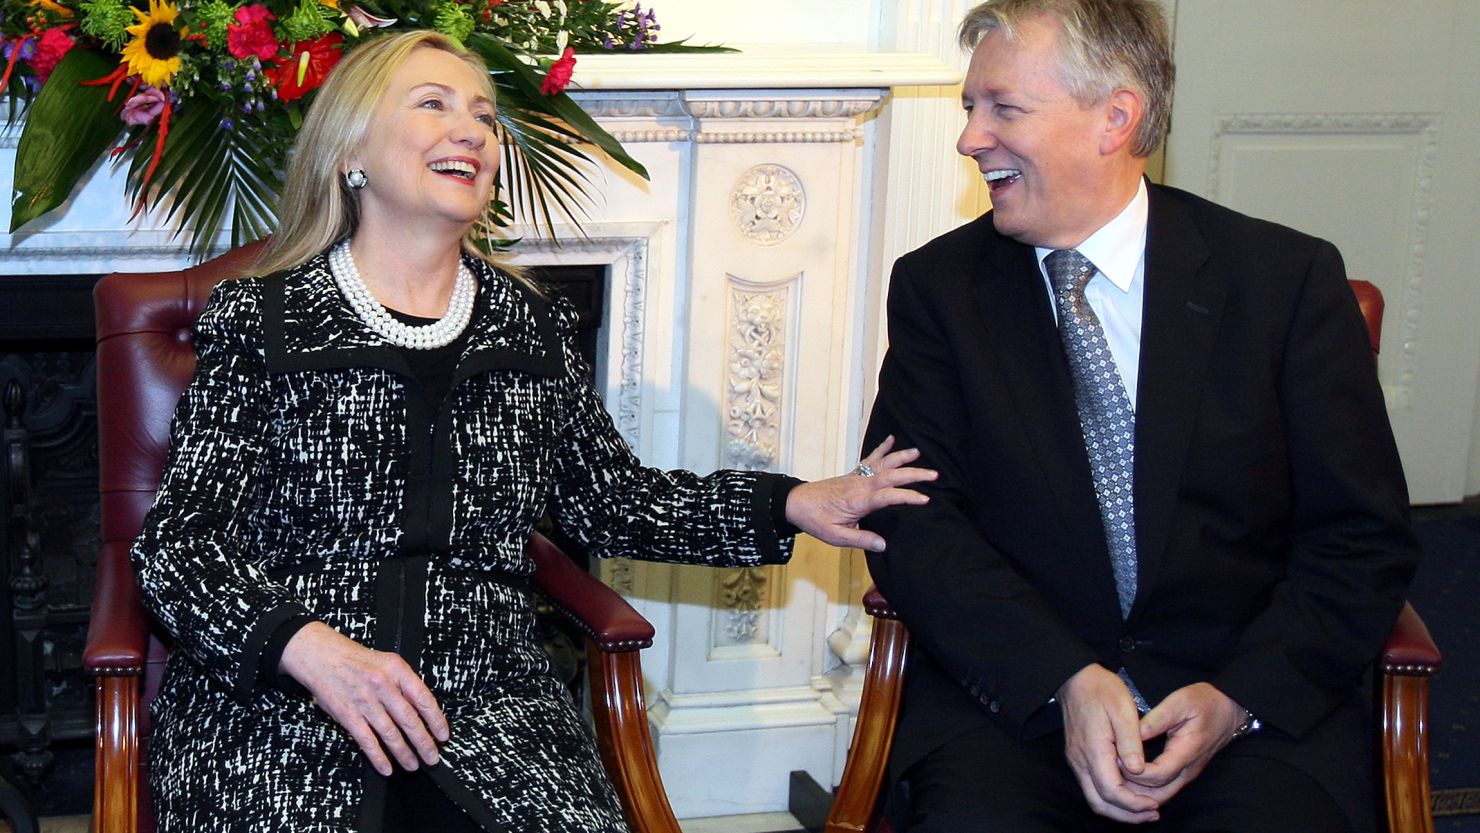 U.S. Secretary of State Hillary Clinton talks with Northern Ireland First Minister Peter Robinson in Belfast on Friday.